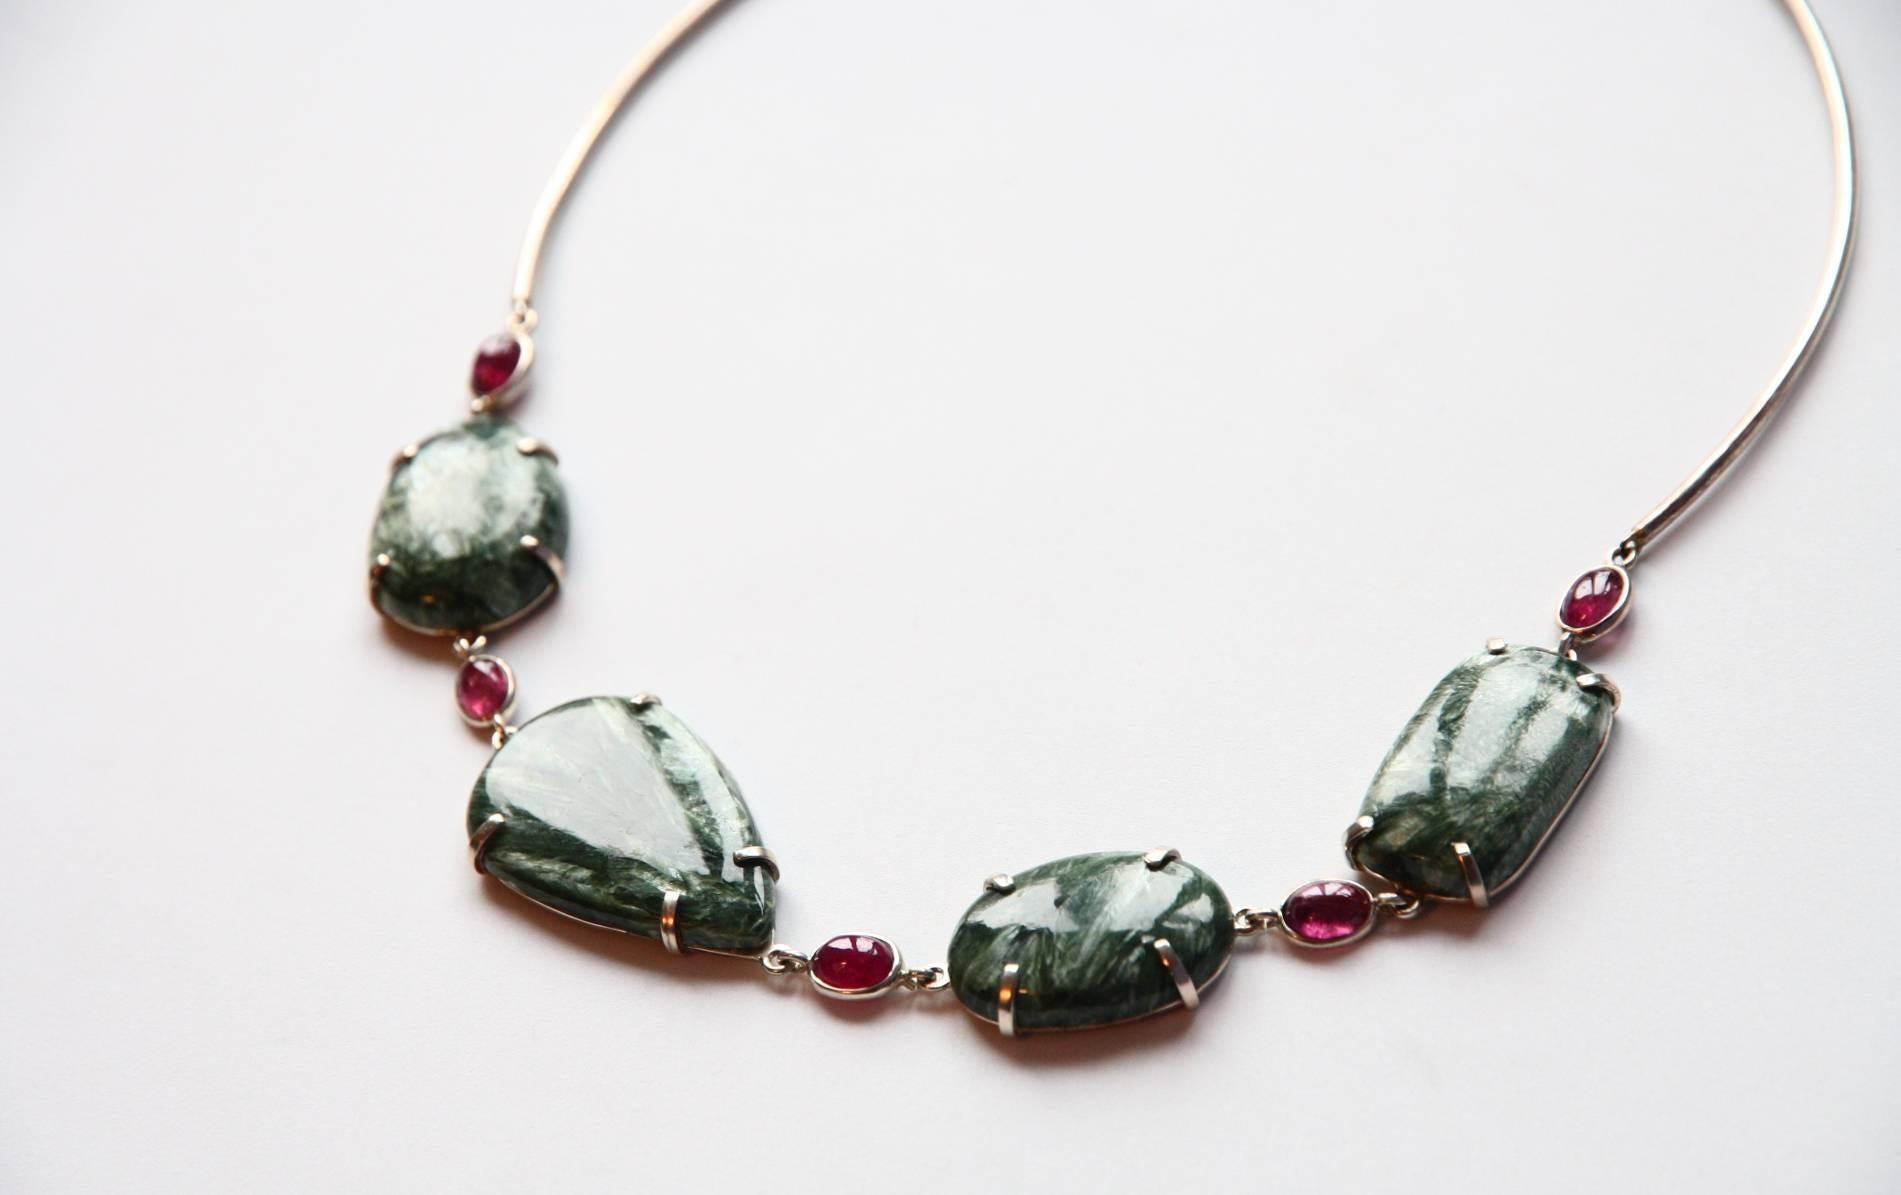 Semi rigid necklace with serafinite stone that takes the name from the feather angel wing, cabochon tourmaline silver linked gr.24,80.
total length 50cm.
All Giulia Colussi jewelry is new and has never been previously owned or worn. Each item will